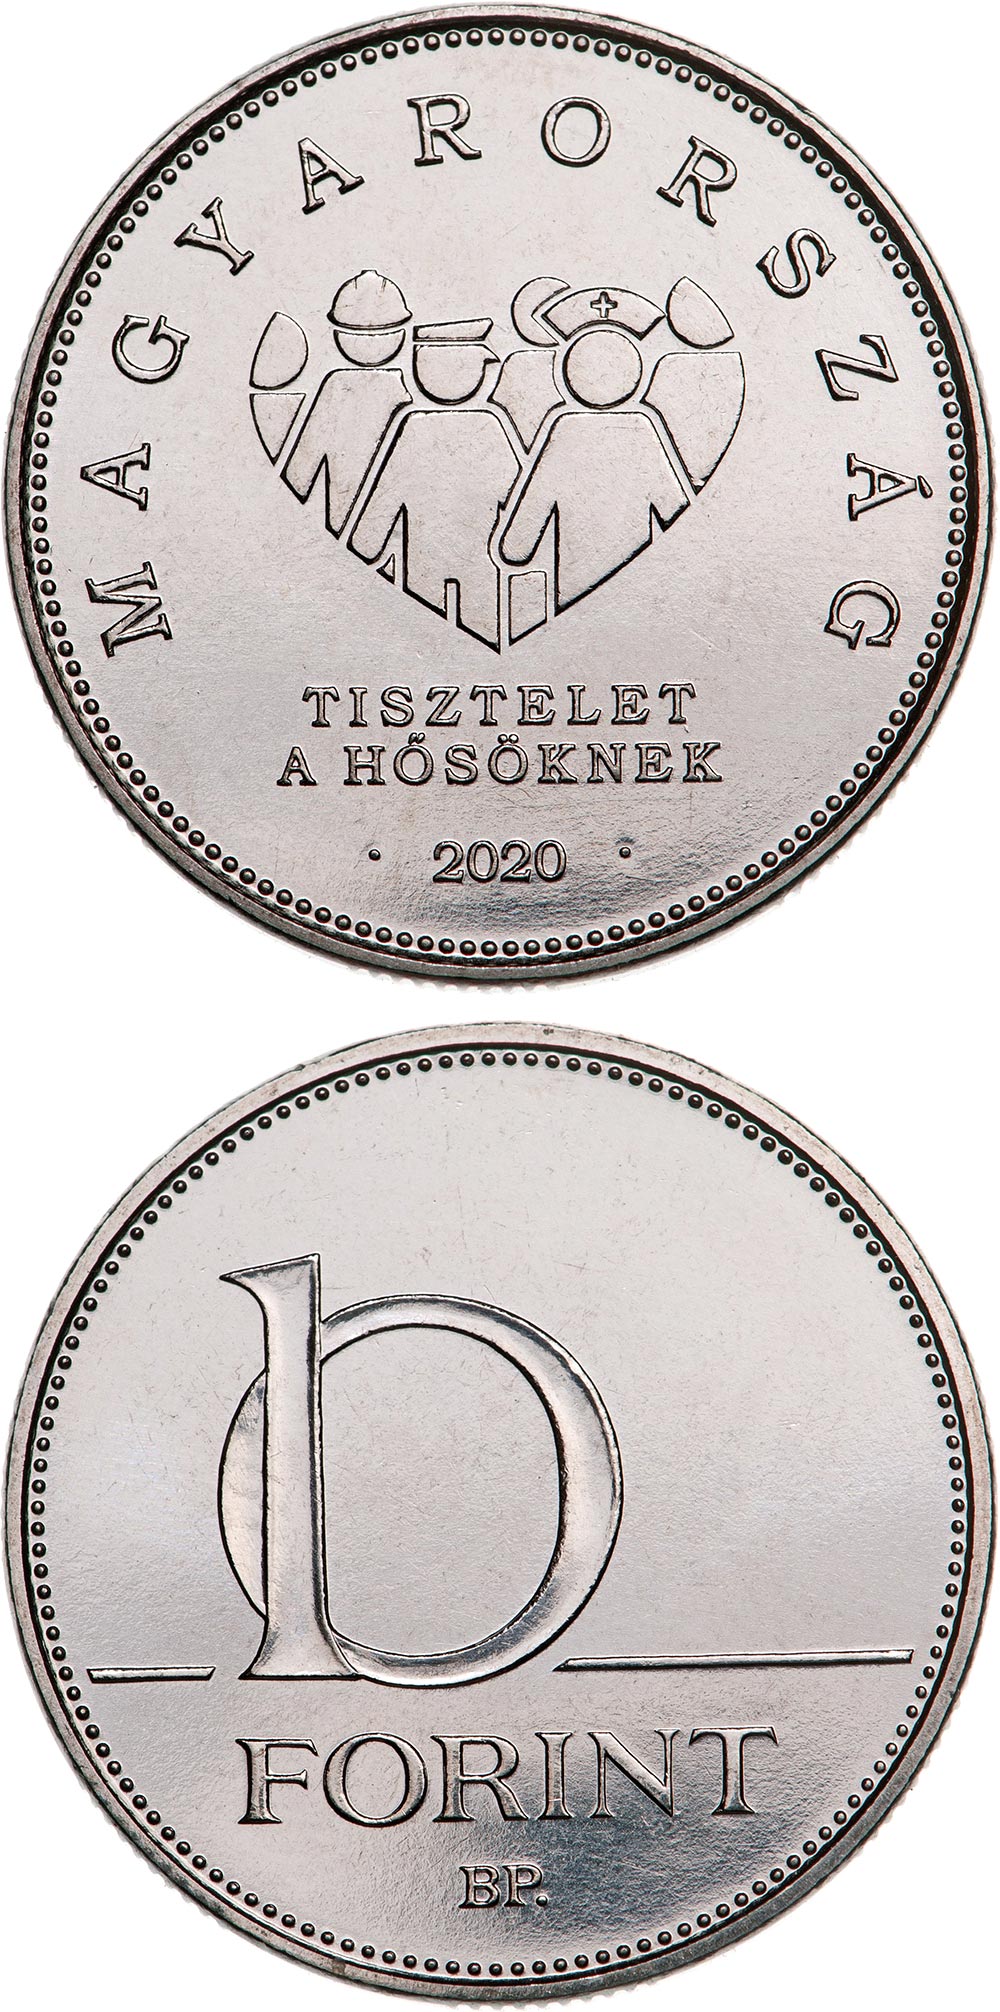 Image of 10 forint coin - Everyday heroes standing their ground during the emergency | Hungary 2020.  The Copper–Nickel (CuNi) coin is of UNC quality.